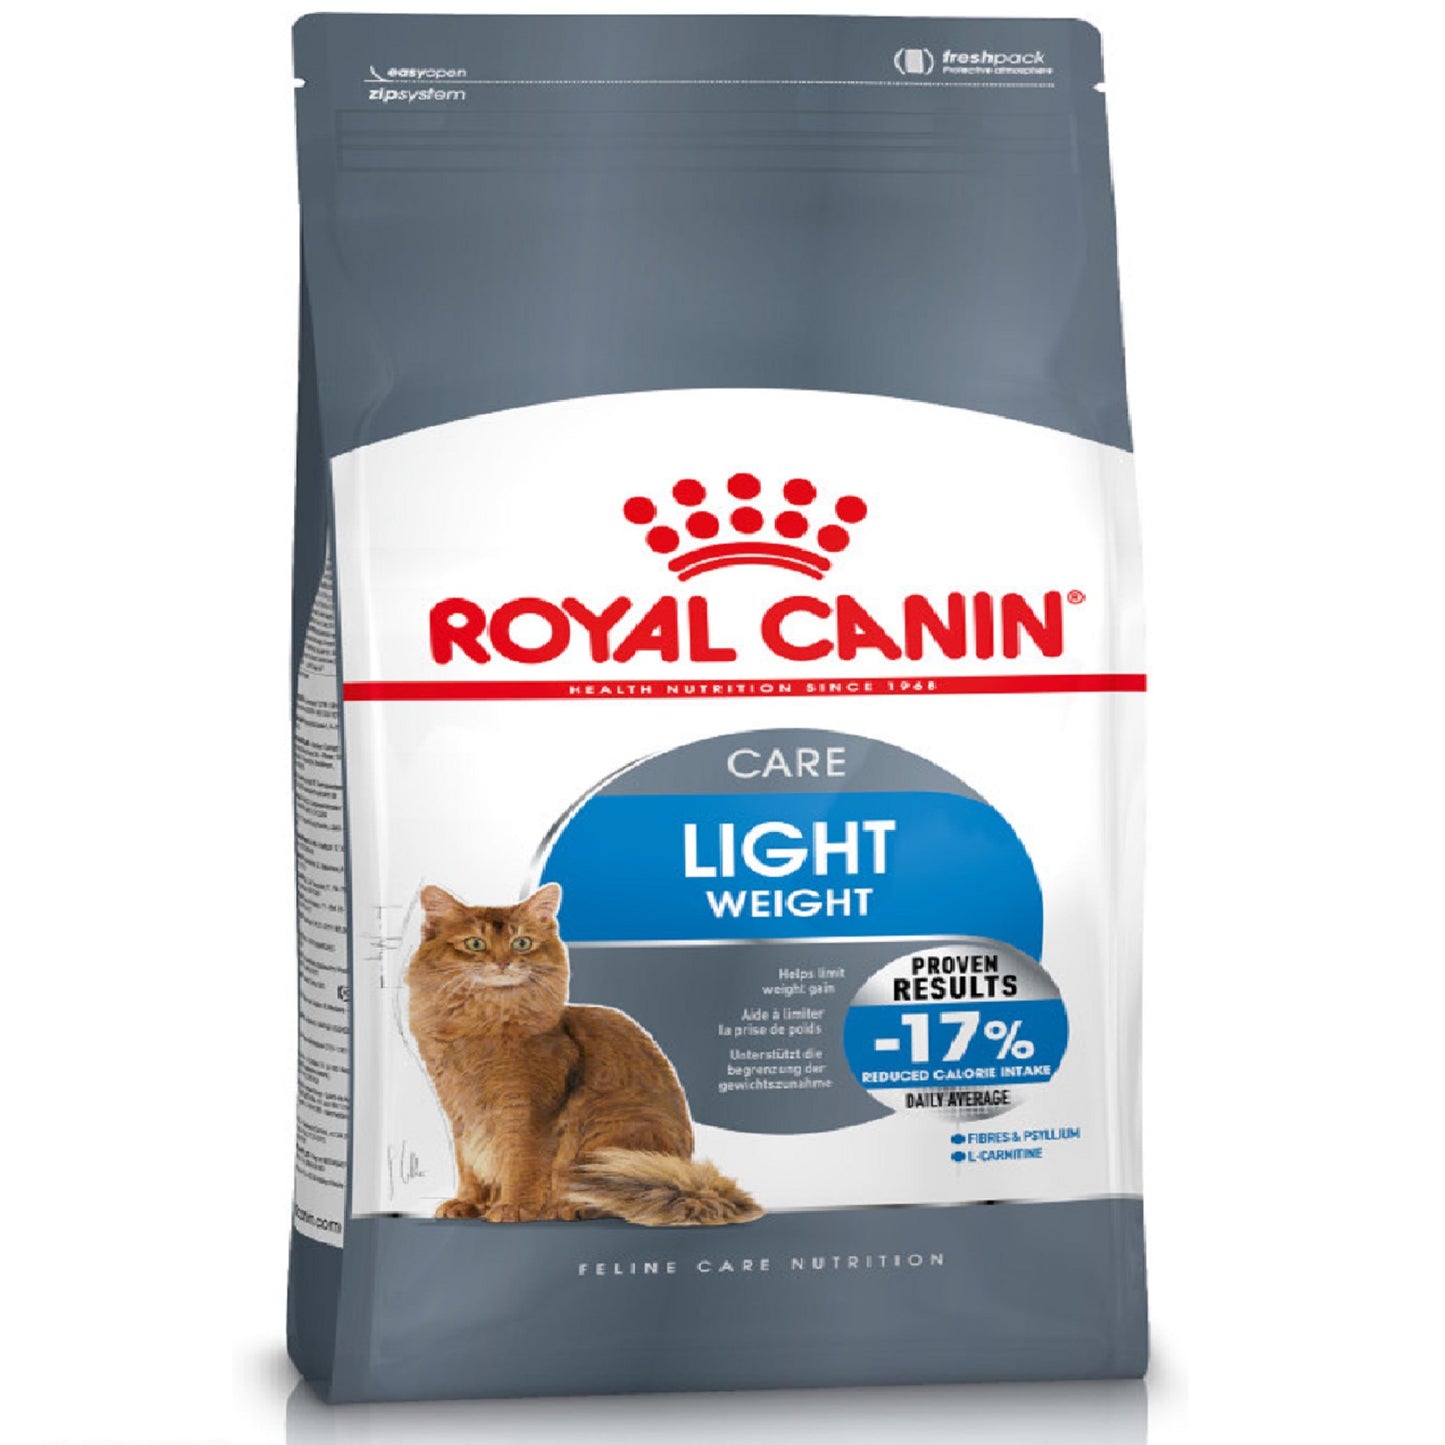 ROYAL CANIN - Light Weight Care